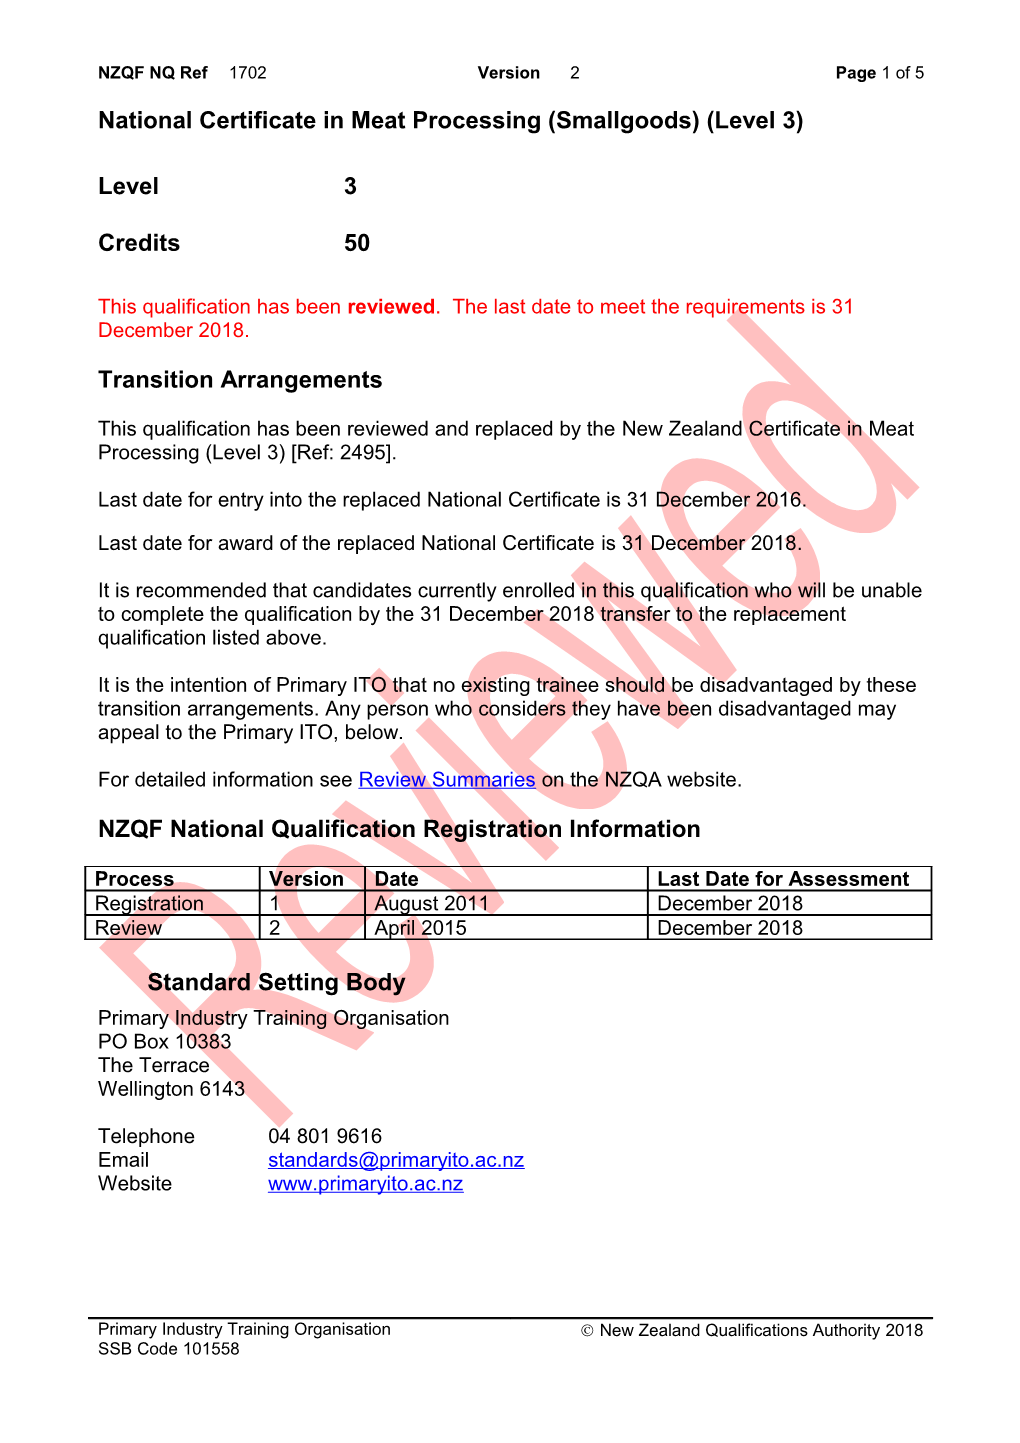 1702 National Certificate in Meat Processing (Smallgoods) (Level 3)